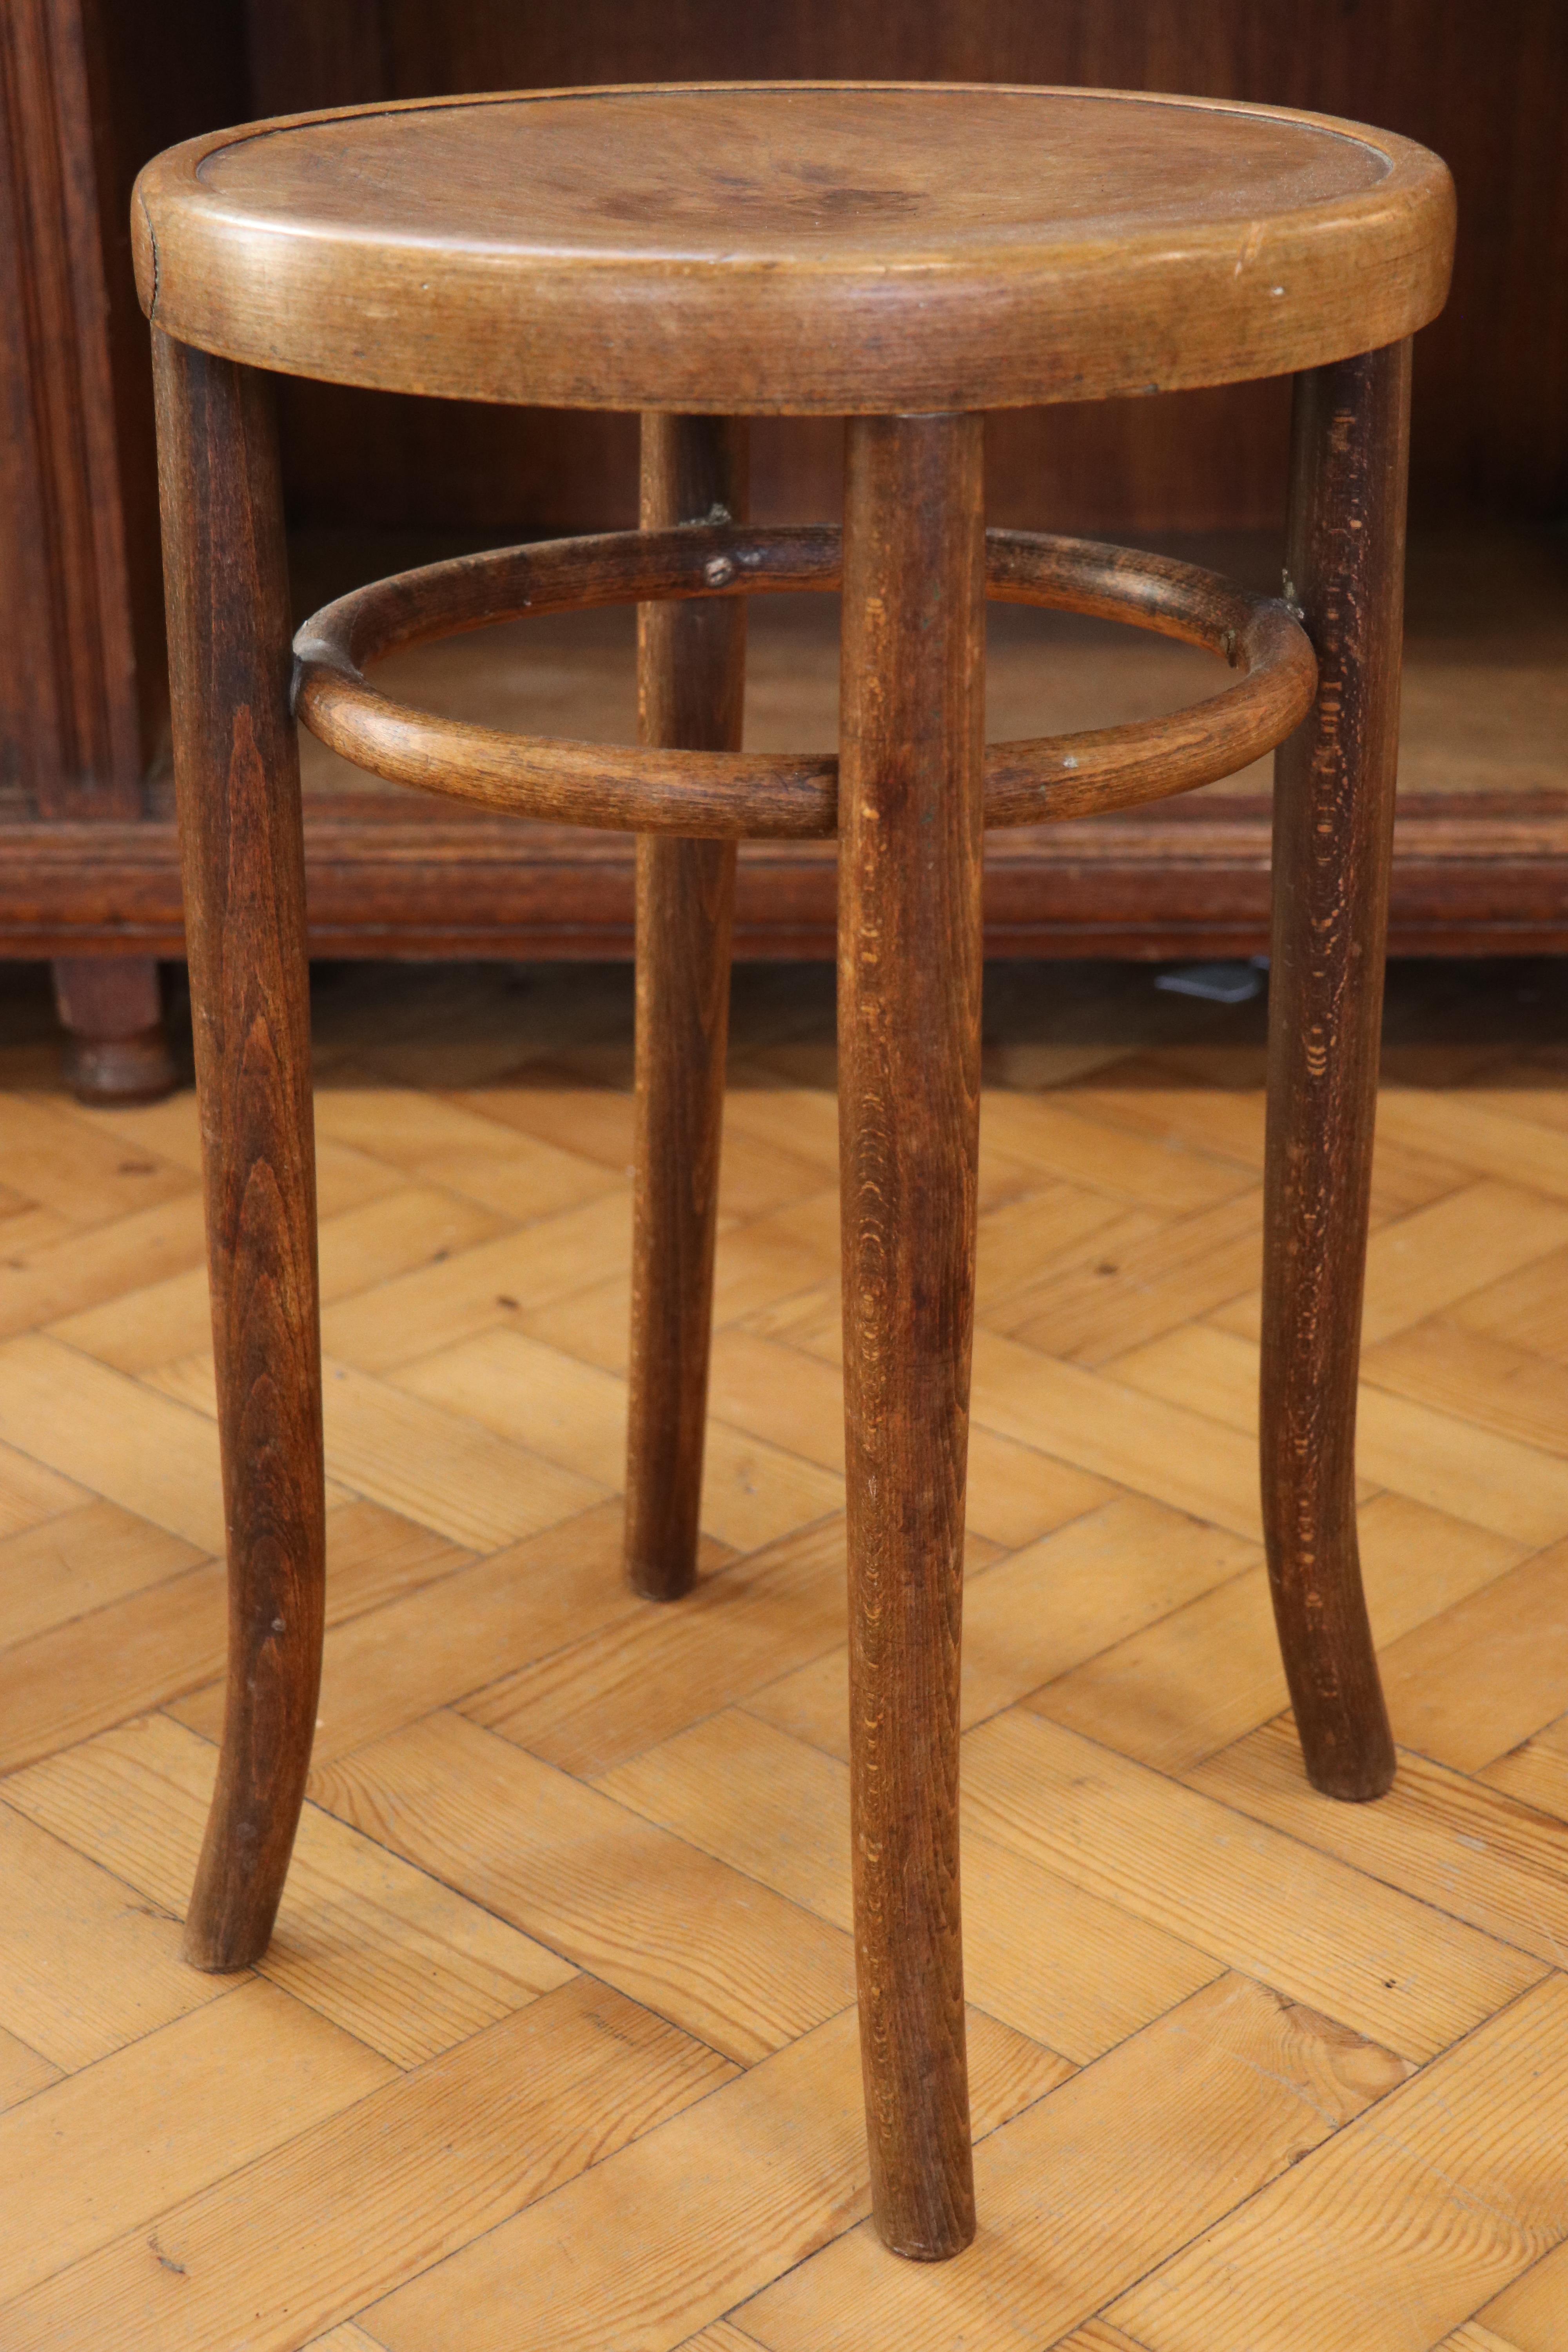 A 1920s/1930s Fischell bentwood stool, 35 cm x 35 cm (seat) x 55 cm high - Image 2 of 3